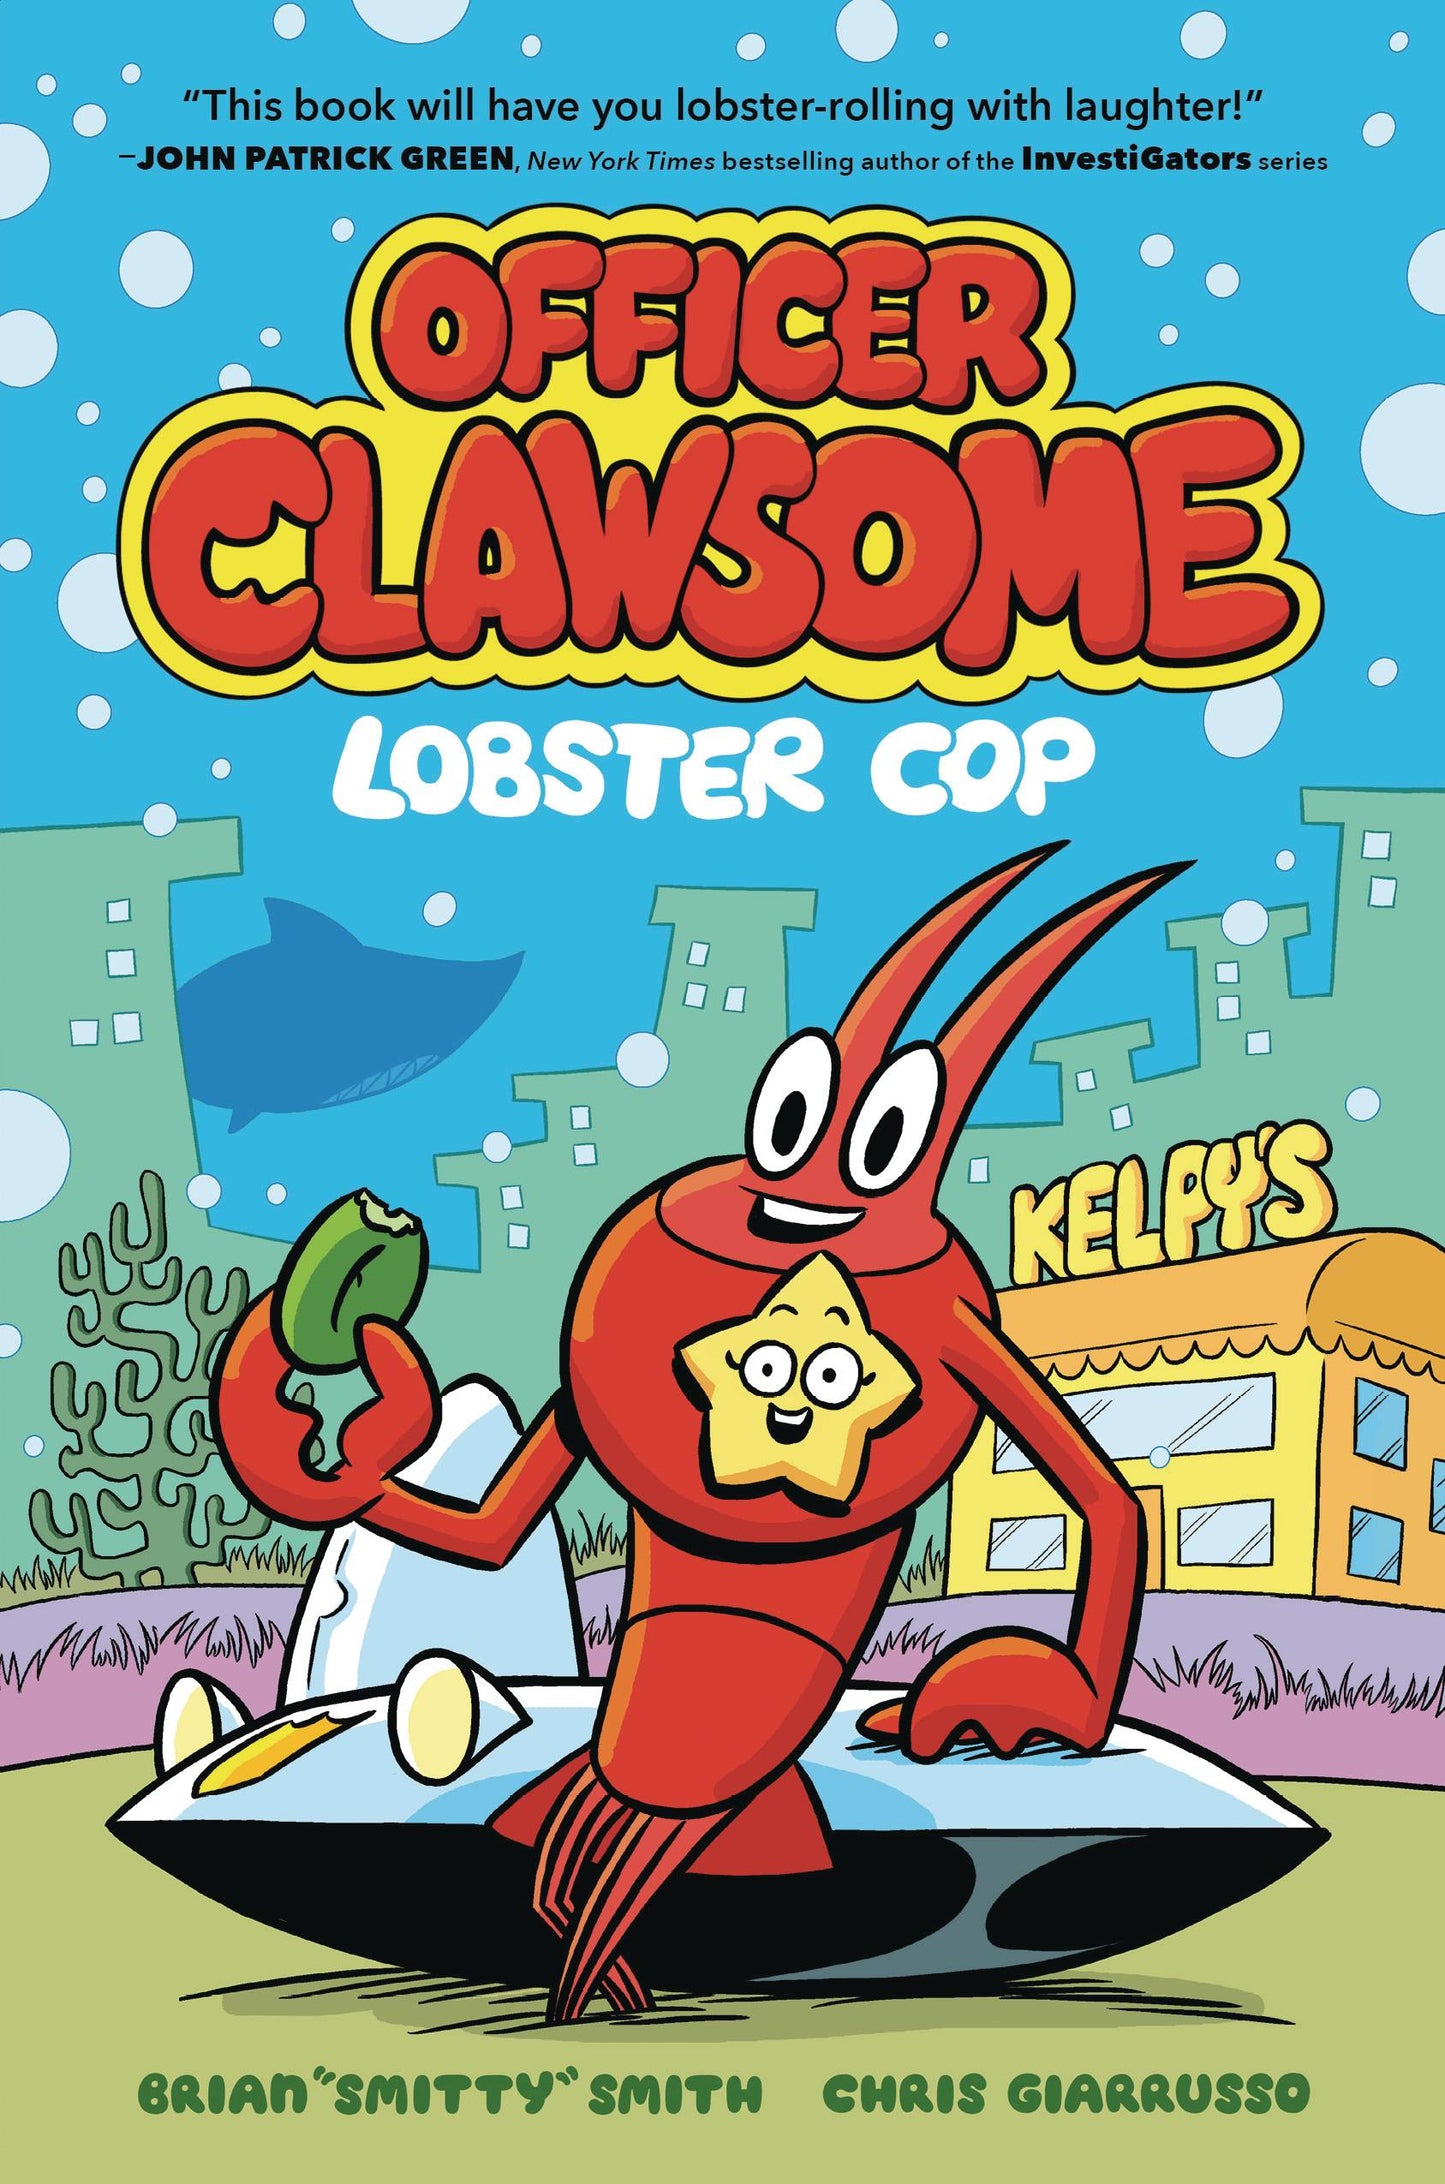 The One Stop Shop Comics & Games Officer Clawsome Gn Vol 01 Lobster Cop (C: 0-1-0) (01/04/2023) HARPER ALLEY